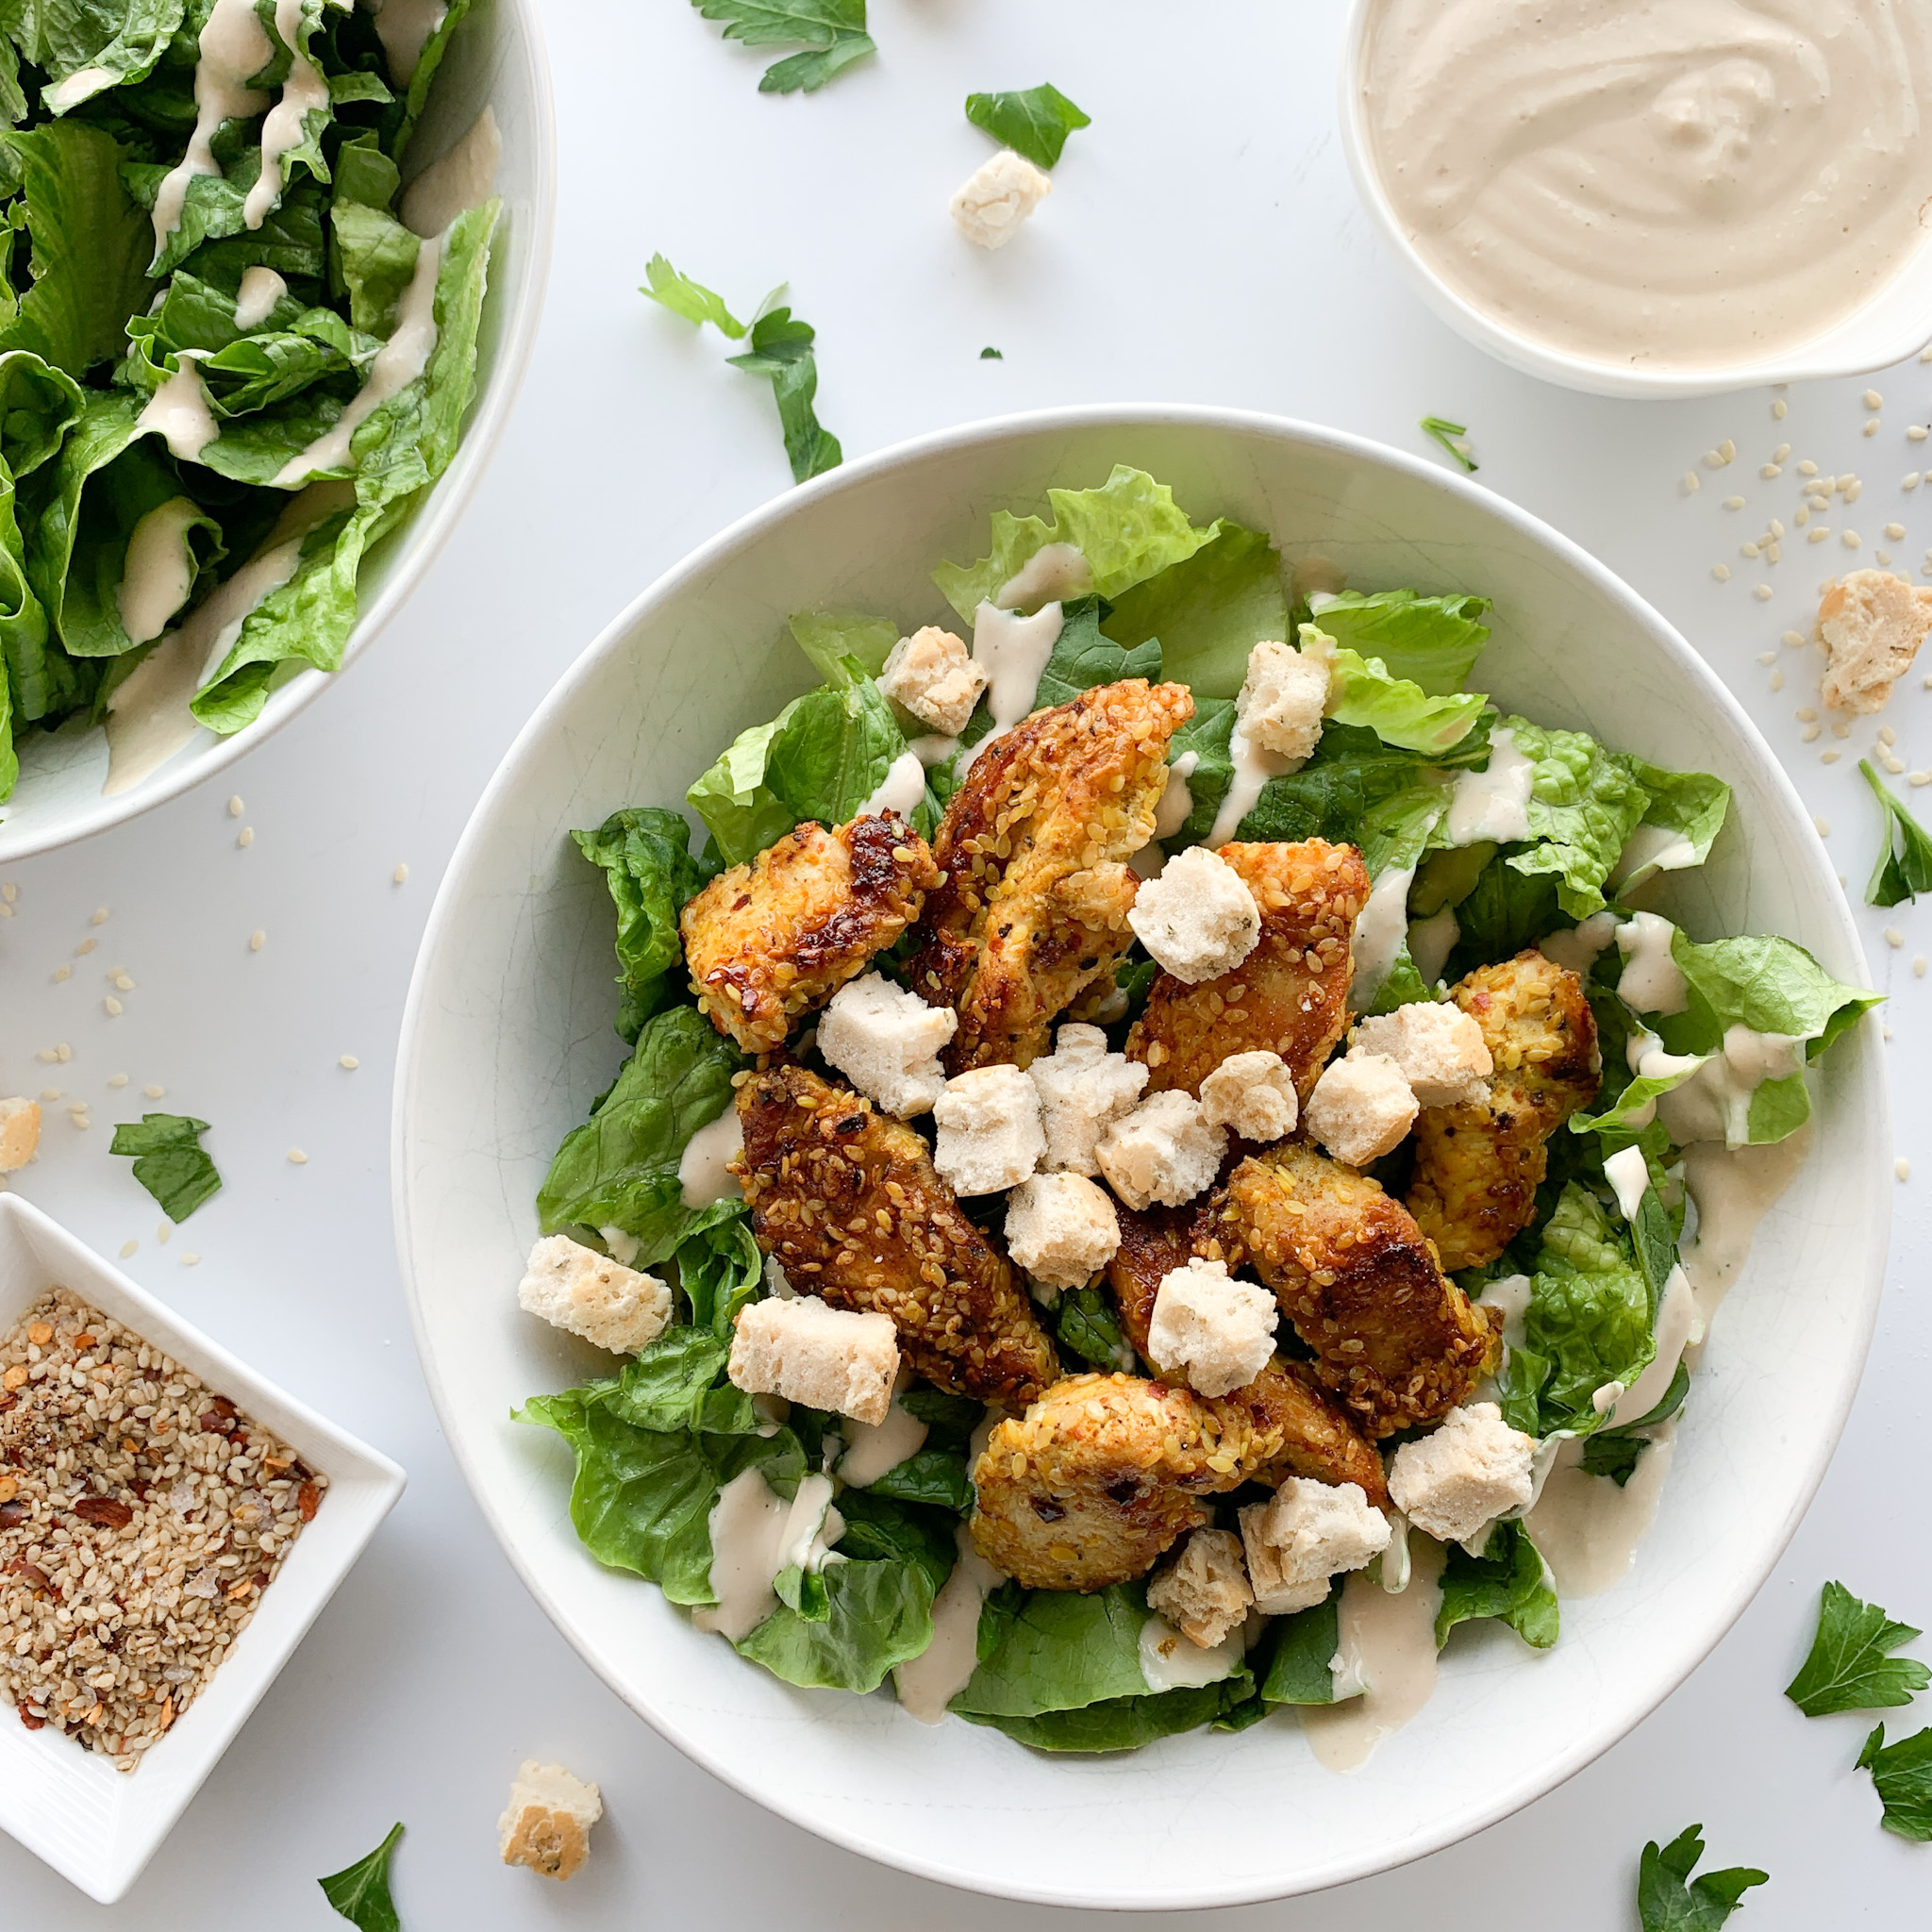 This homemade gluten-free spicy Chicken Caesar salad is packed with flavour, spice and crunch. This salad would also work as a filling in a wrap for lunch or a picnic.